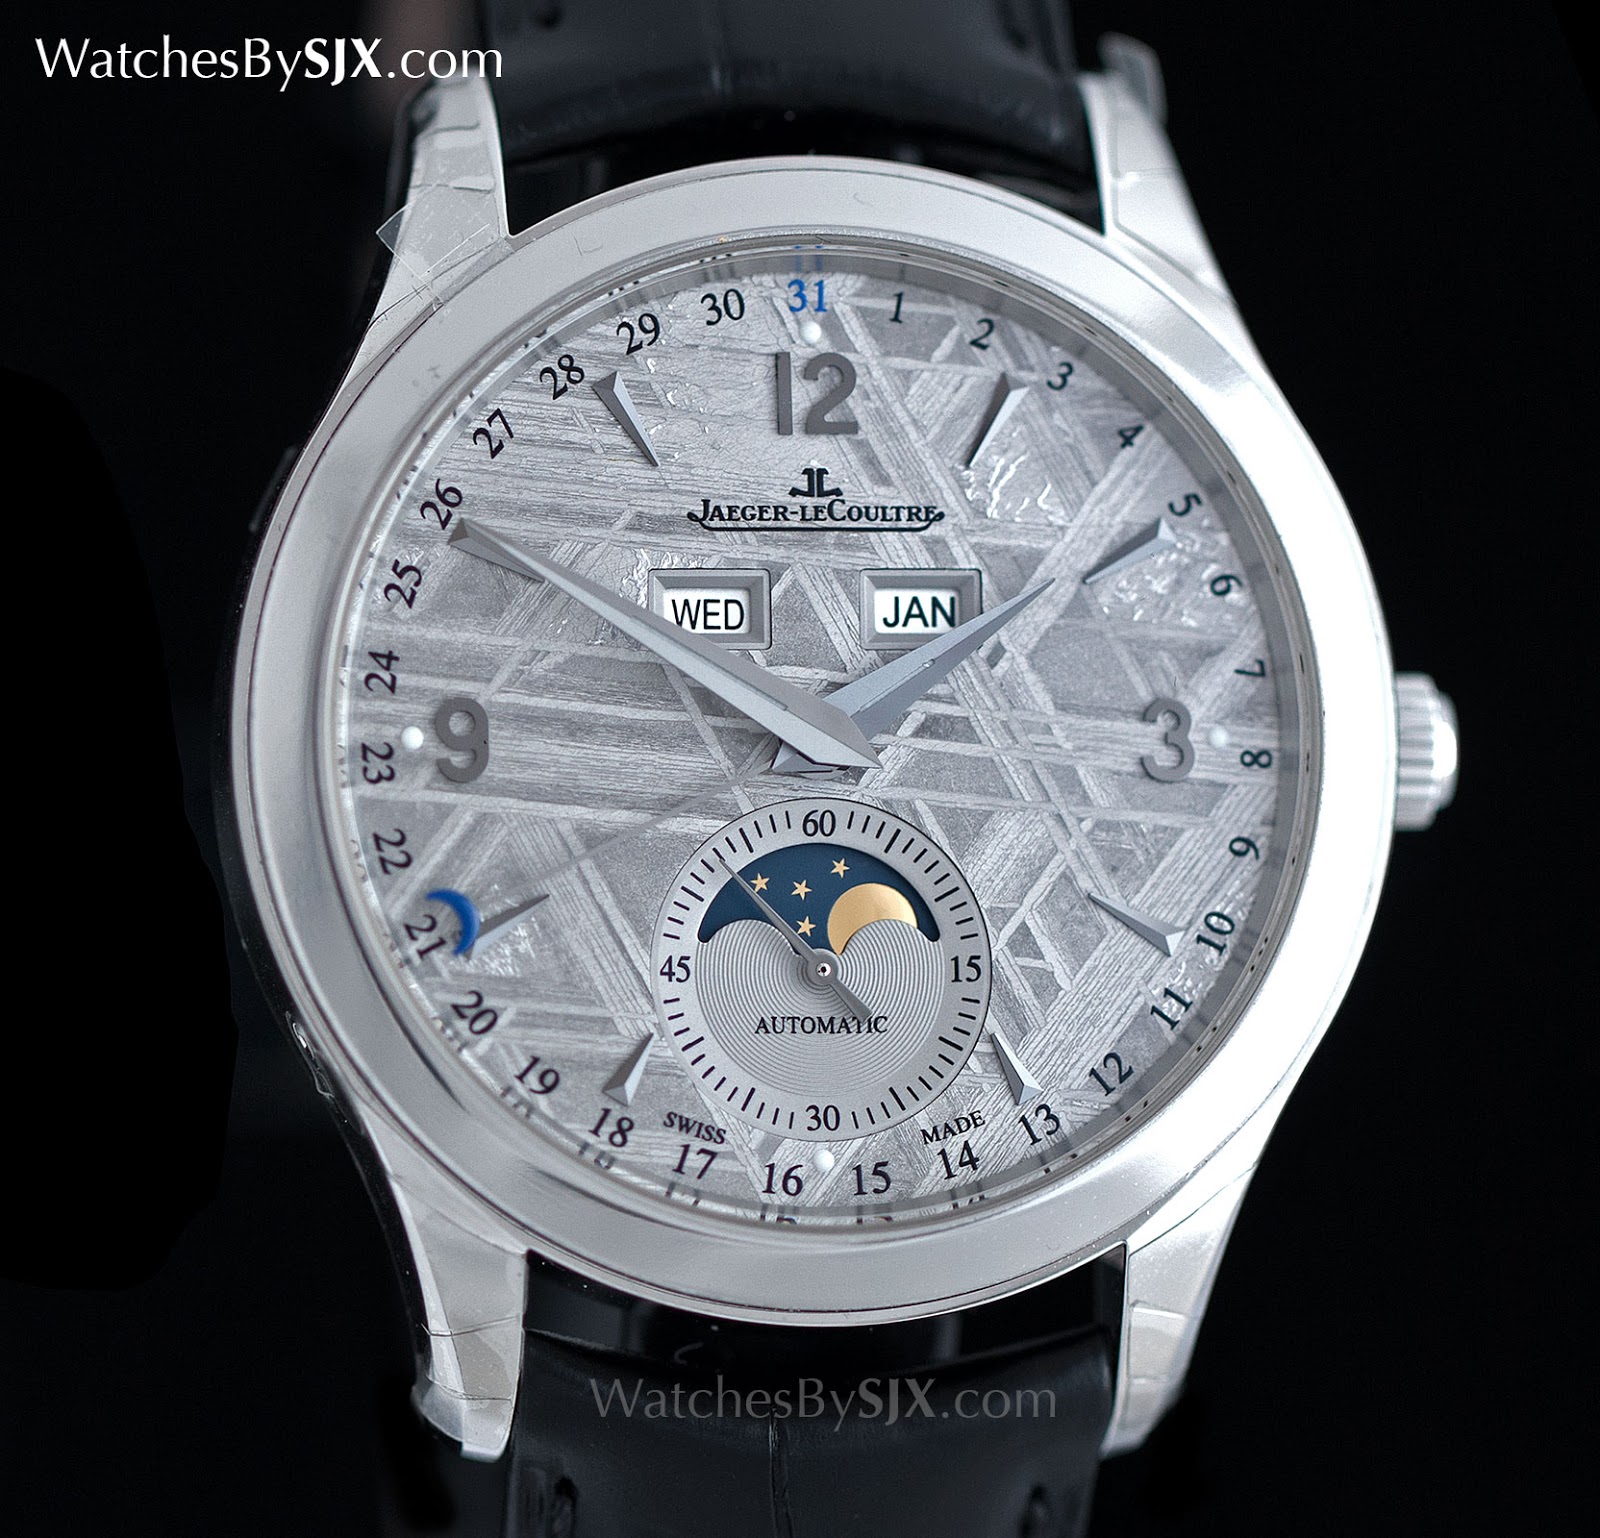 Up Close With The Jaeger Lecoultre Master Calendar Meteorite With Original Photos Price Sjx Watches